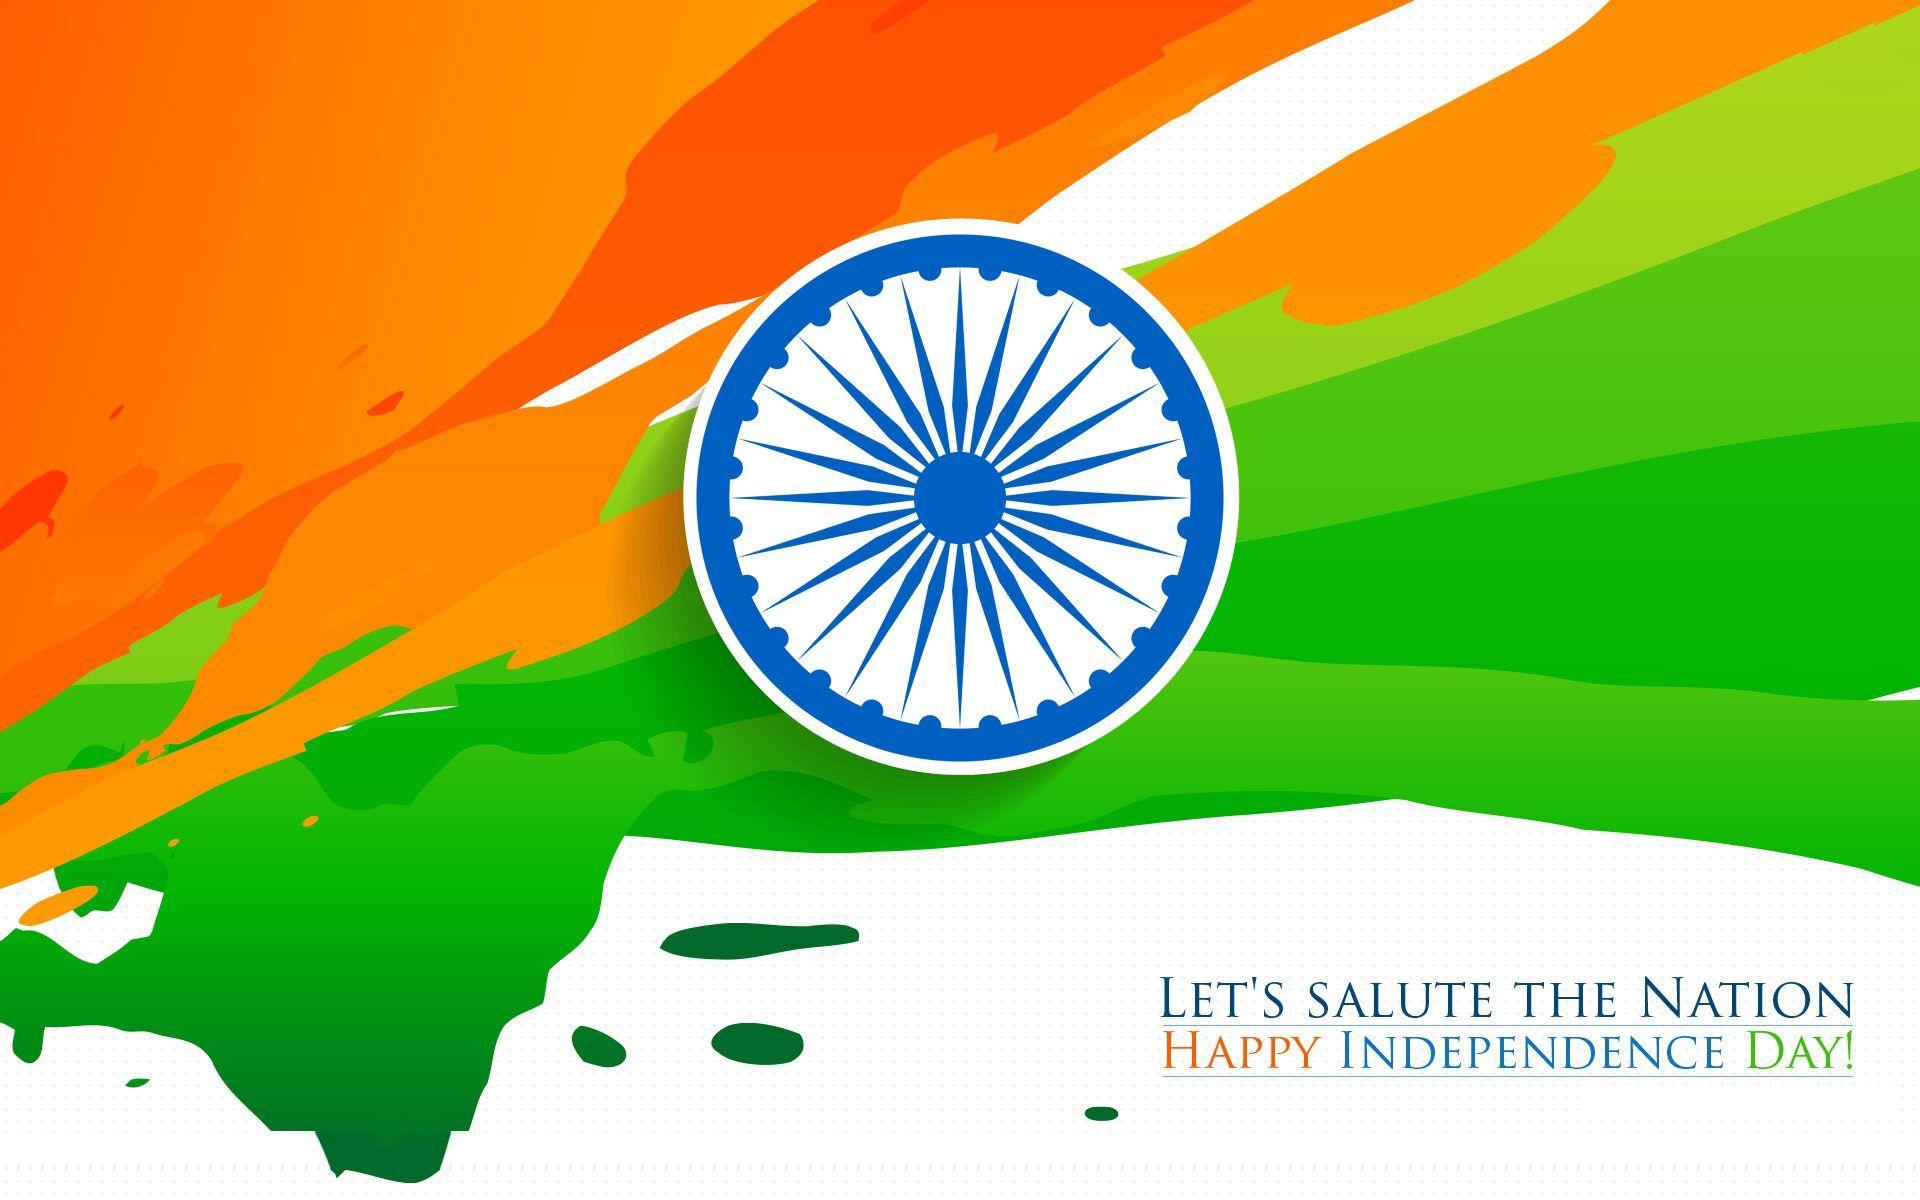 Happy Independence Day 2021 HD Wallpapers - Wallpaper Cave